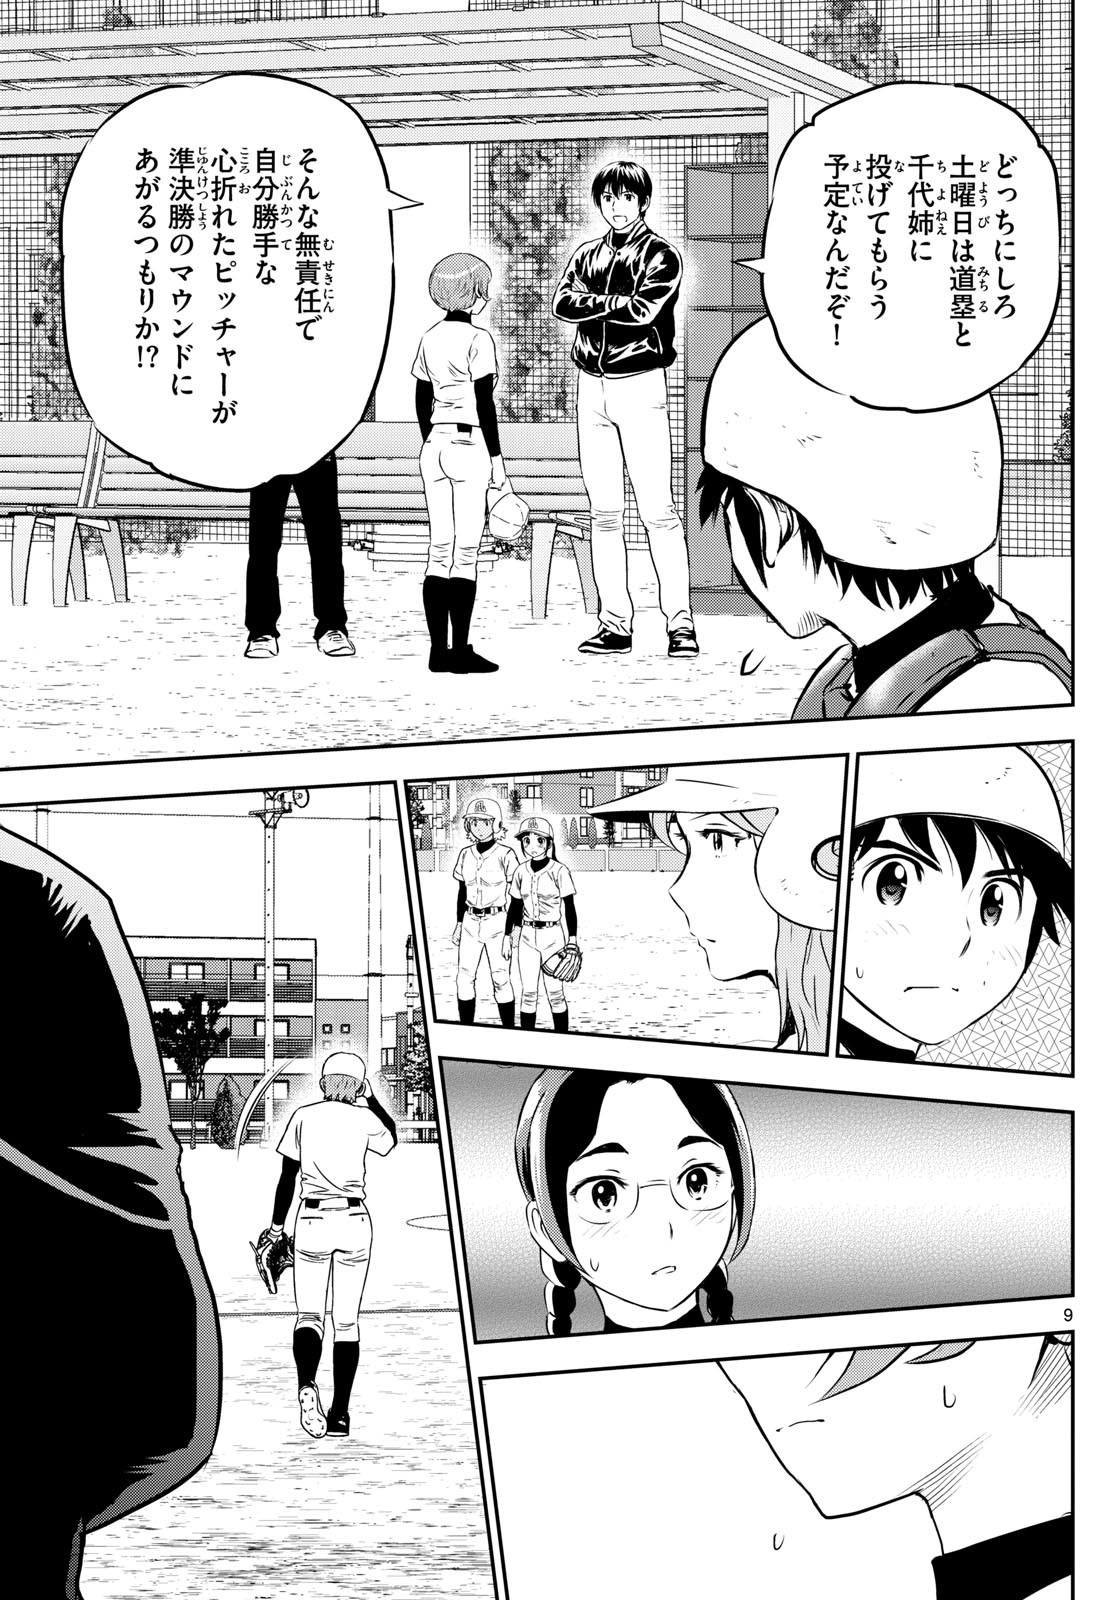 Major 2nd - メジャーセカンド - Chapter 281 - Page 9